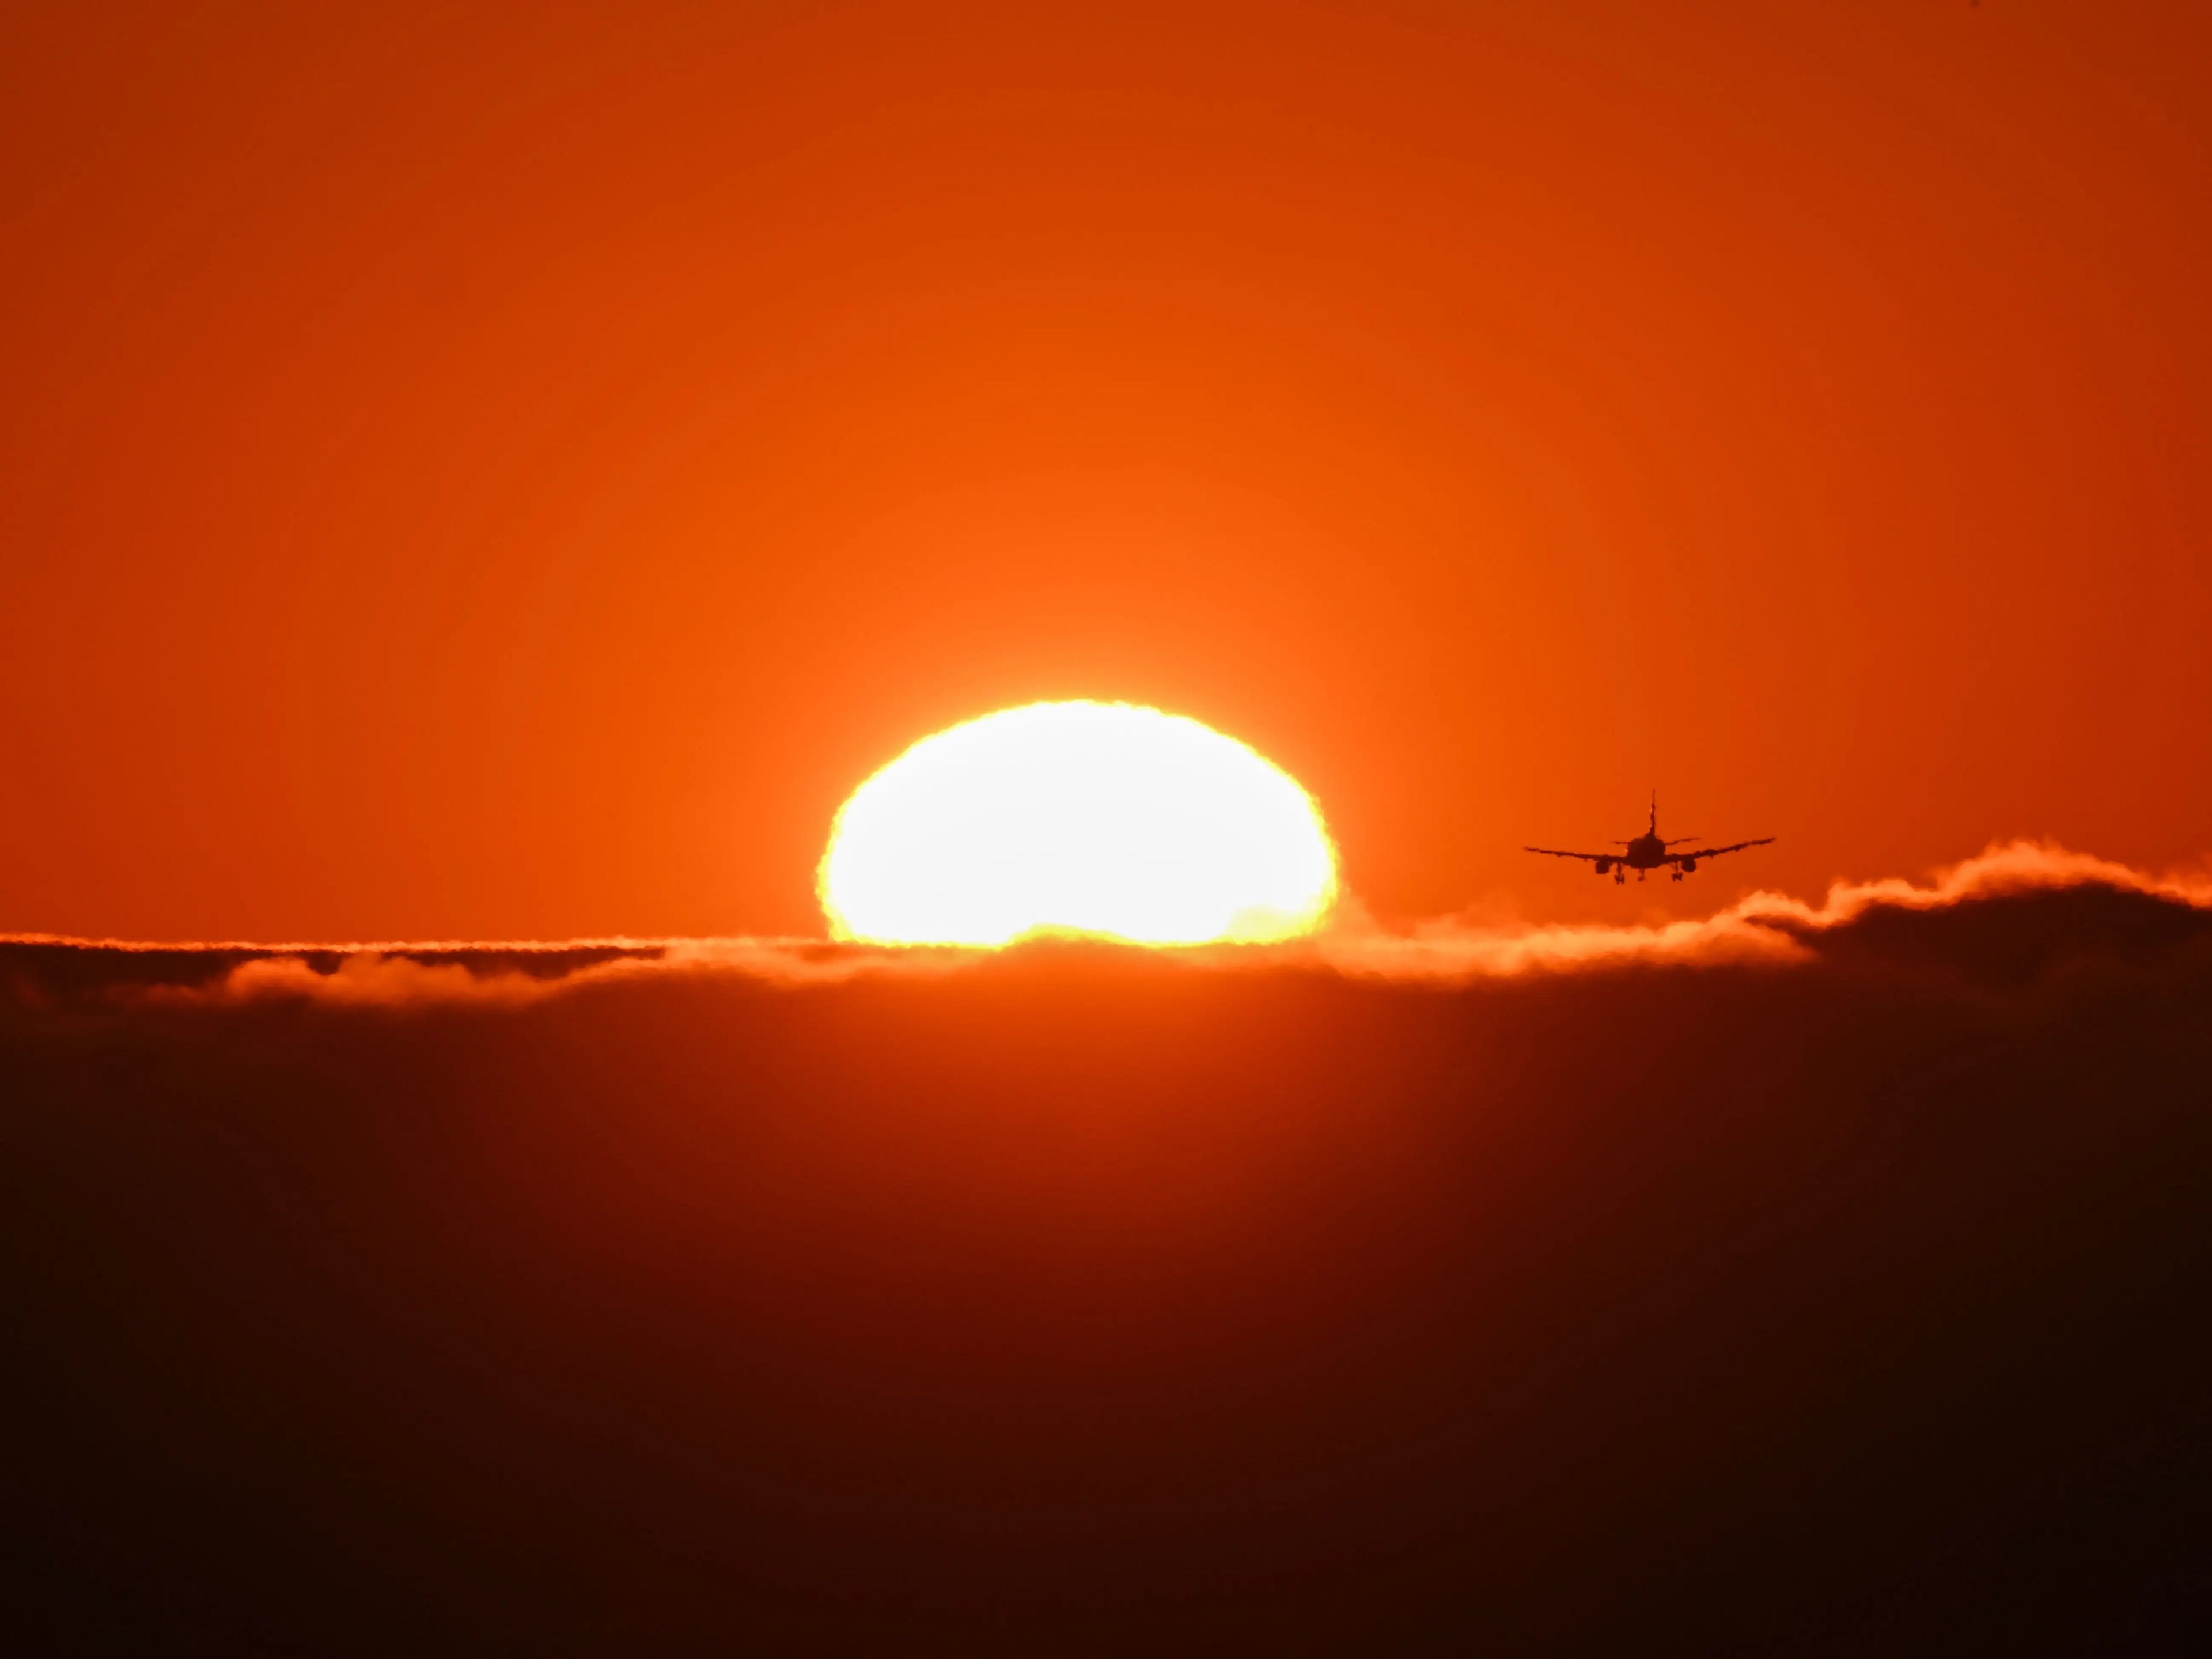 A plane lands during California's heat wave at the San Francisco International Airport.